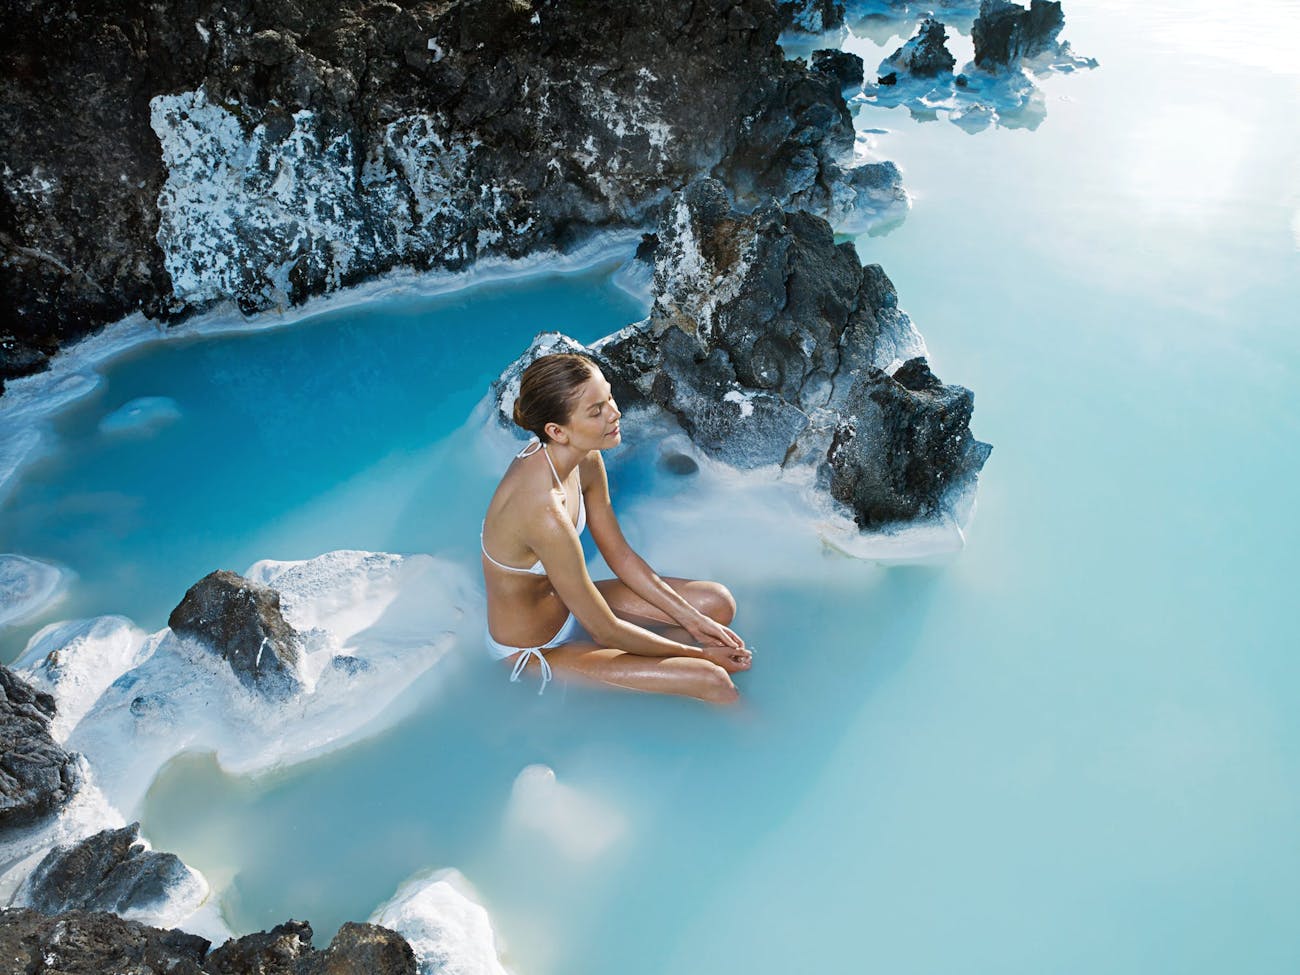 Hidden Beach Nudist Resort - When You Have to Get Naked in Iceland | Guide to Iceland